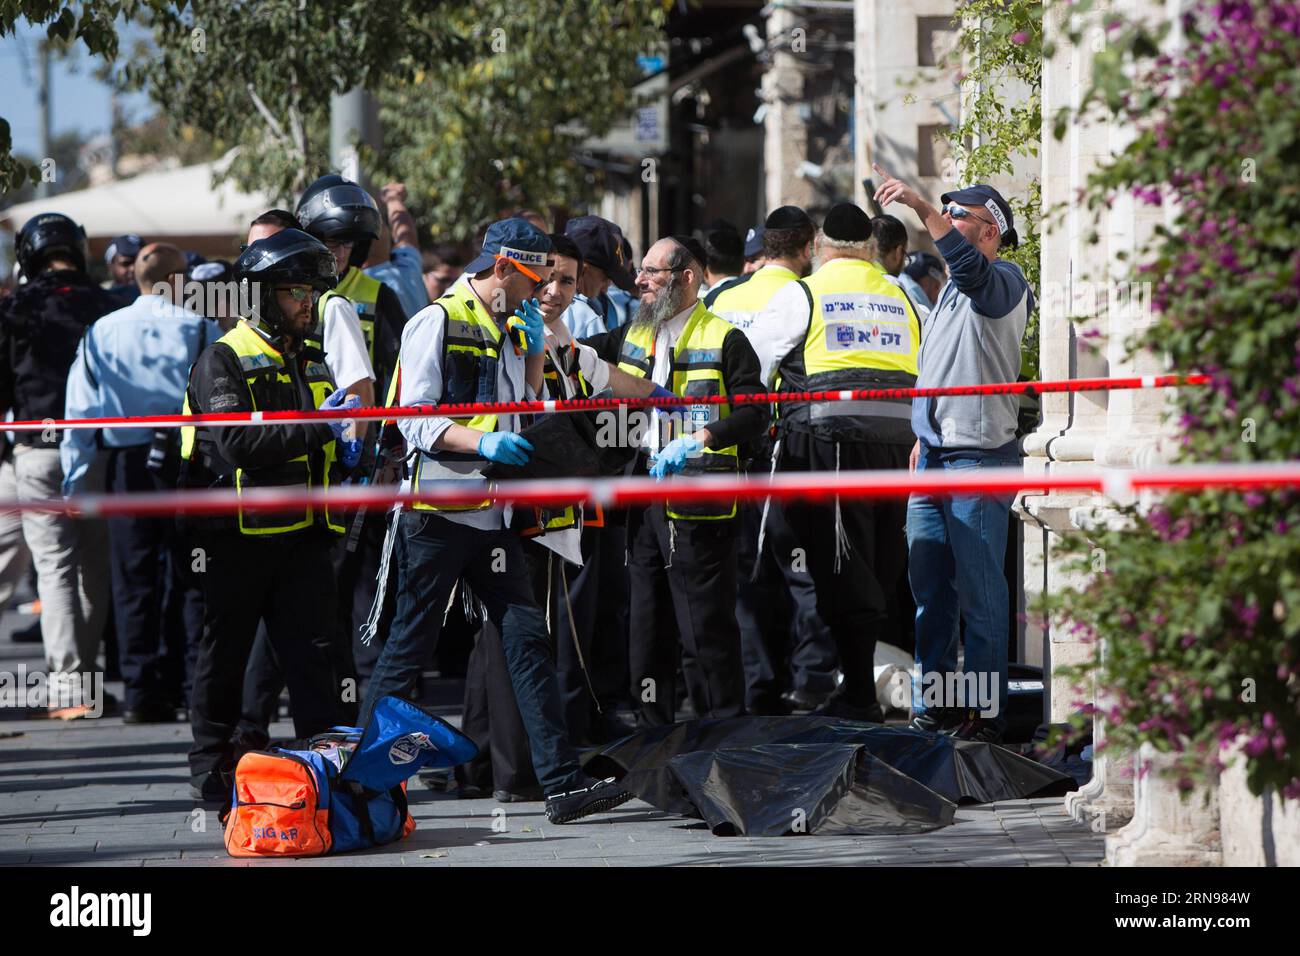 Palästinensisches Mädchen nach Attacke in Jerusalem erschossen (151123) -- JERUSALEM, Nov. 23, 2015 -- Israeli security forces and members of ZAKA team (a voluntary organisation responding to tragic incidents in Israel) work next to the covered body of a Palestinian girl at the scene of a stabbing attack outside the Mahne Yehuda, a busy outdoor market in central Jerusalem, on Nov. 23, 2015. Three Palestinian attackers were shot dead on Monday by Israeli security forces after they launched stabbing attacks in a new surge of tensions between the two sides. ) (djj) MIDEAST-JERUSALEM-STABBING ATTA Stock Photo